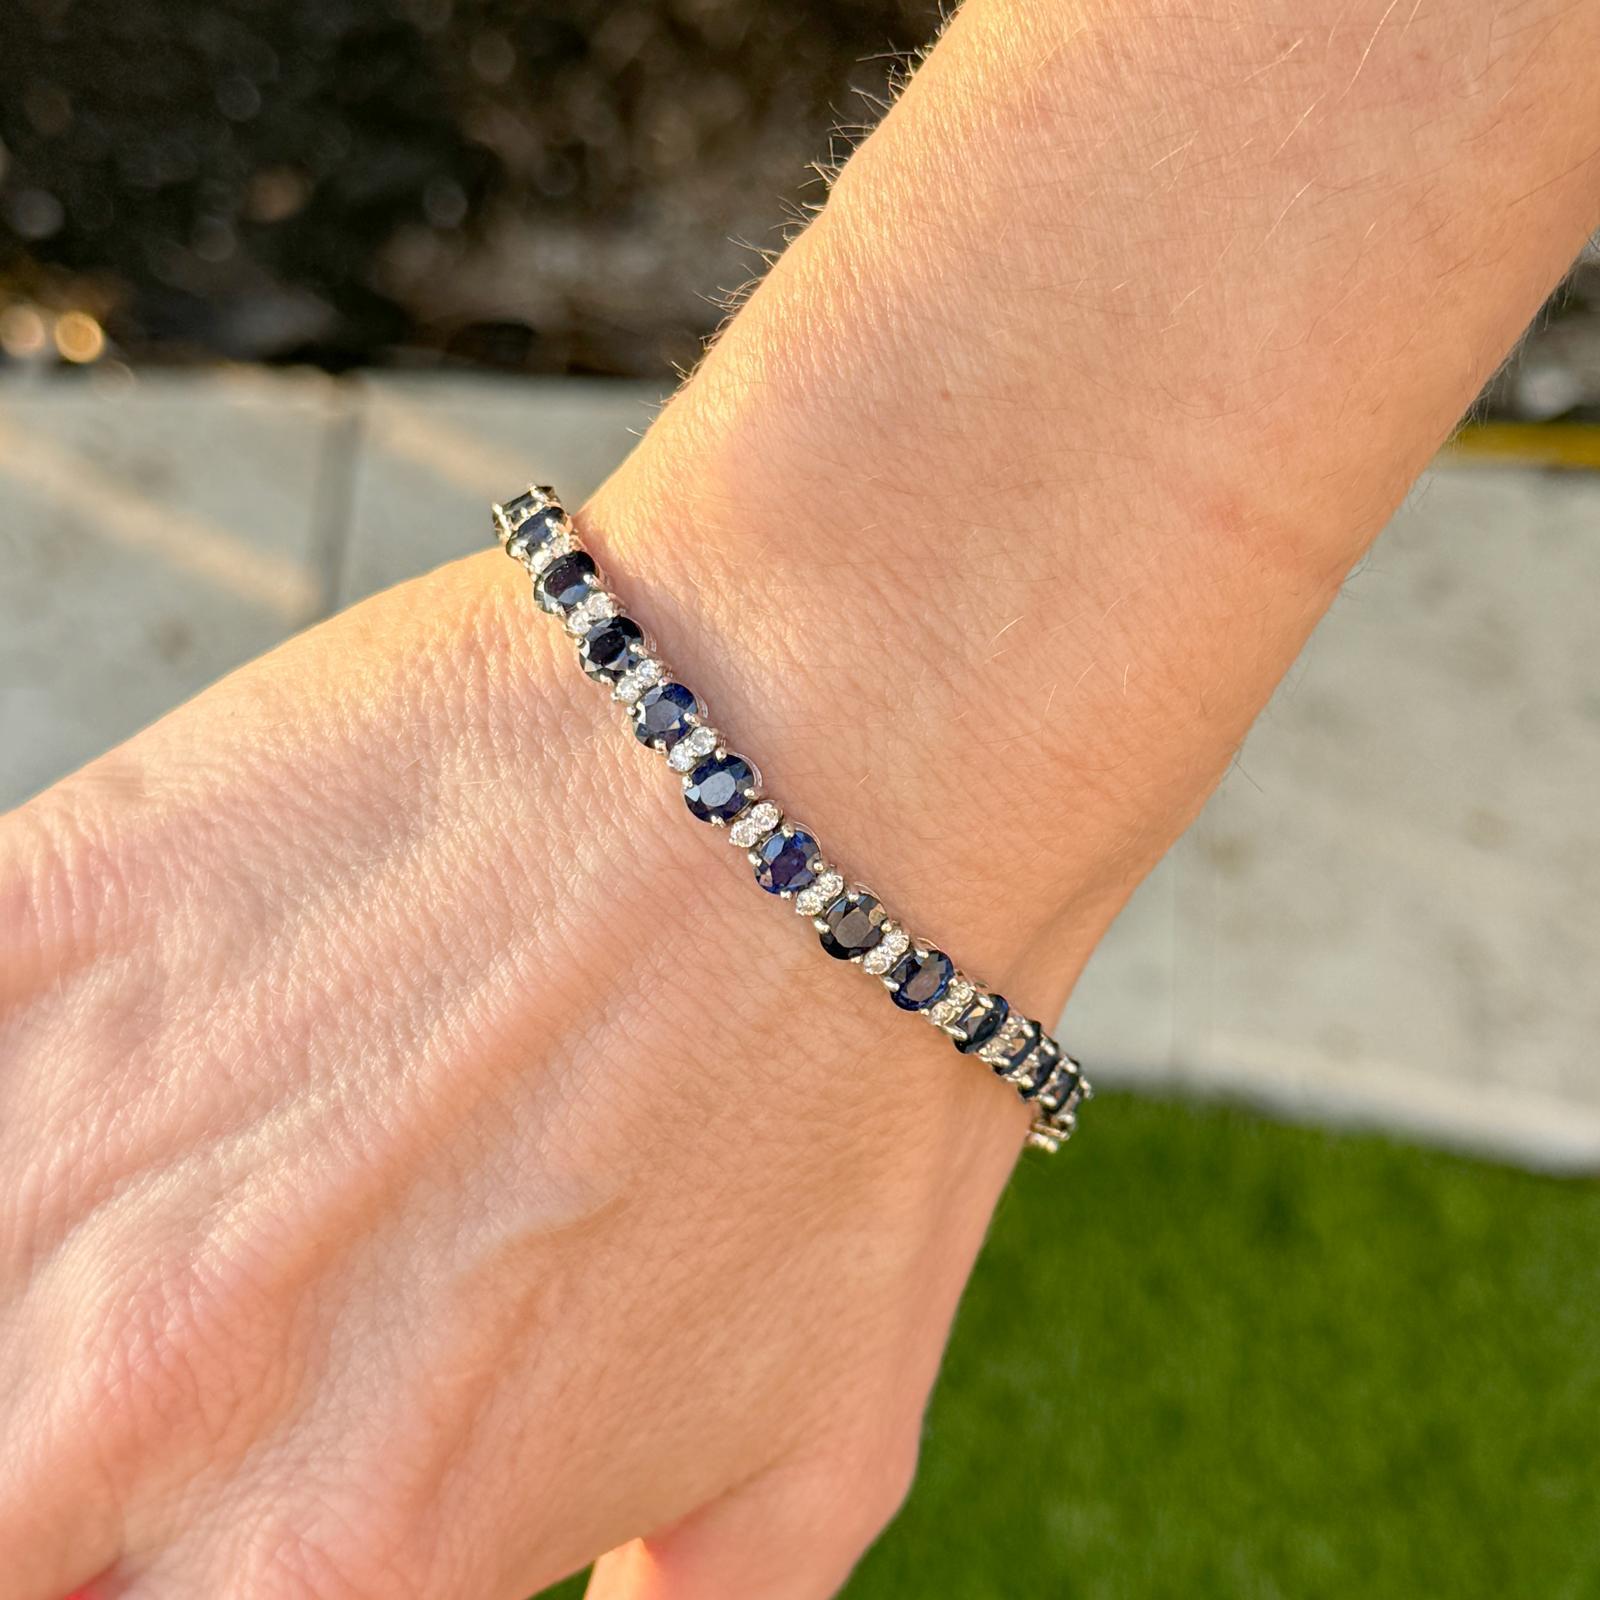 Sapphire and diamond bracelet crafted in 14 karat white gold. The bracelet features 27 natural blue sapphire gemstones weighing approximately 14 carat total weight and 54 round brilliant cut diamonds weighing approximately 1.80 carat total weight.